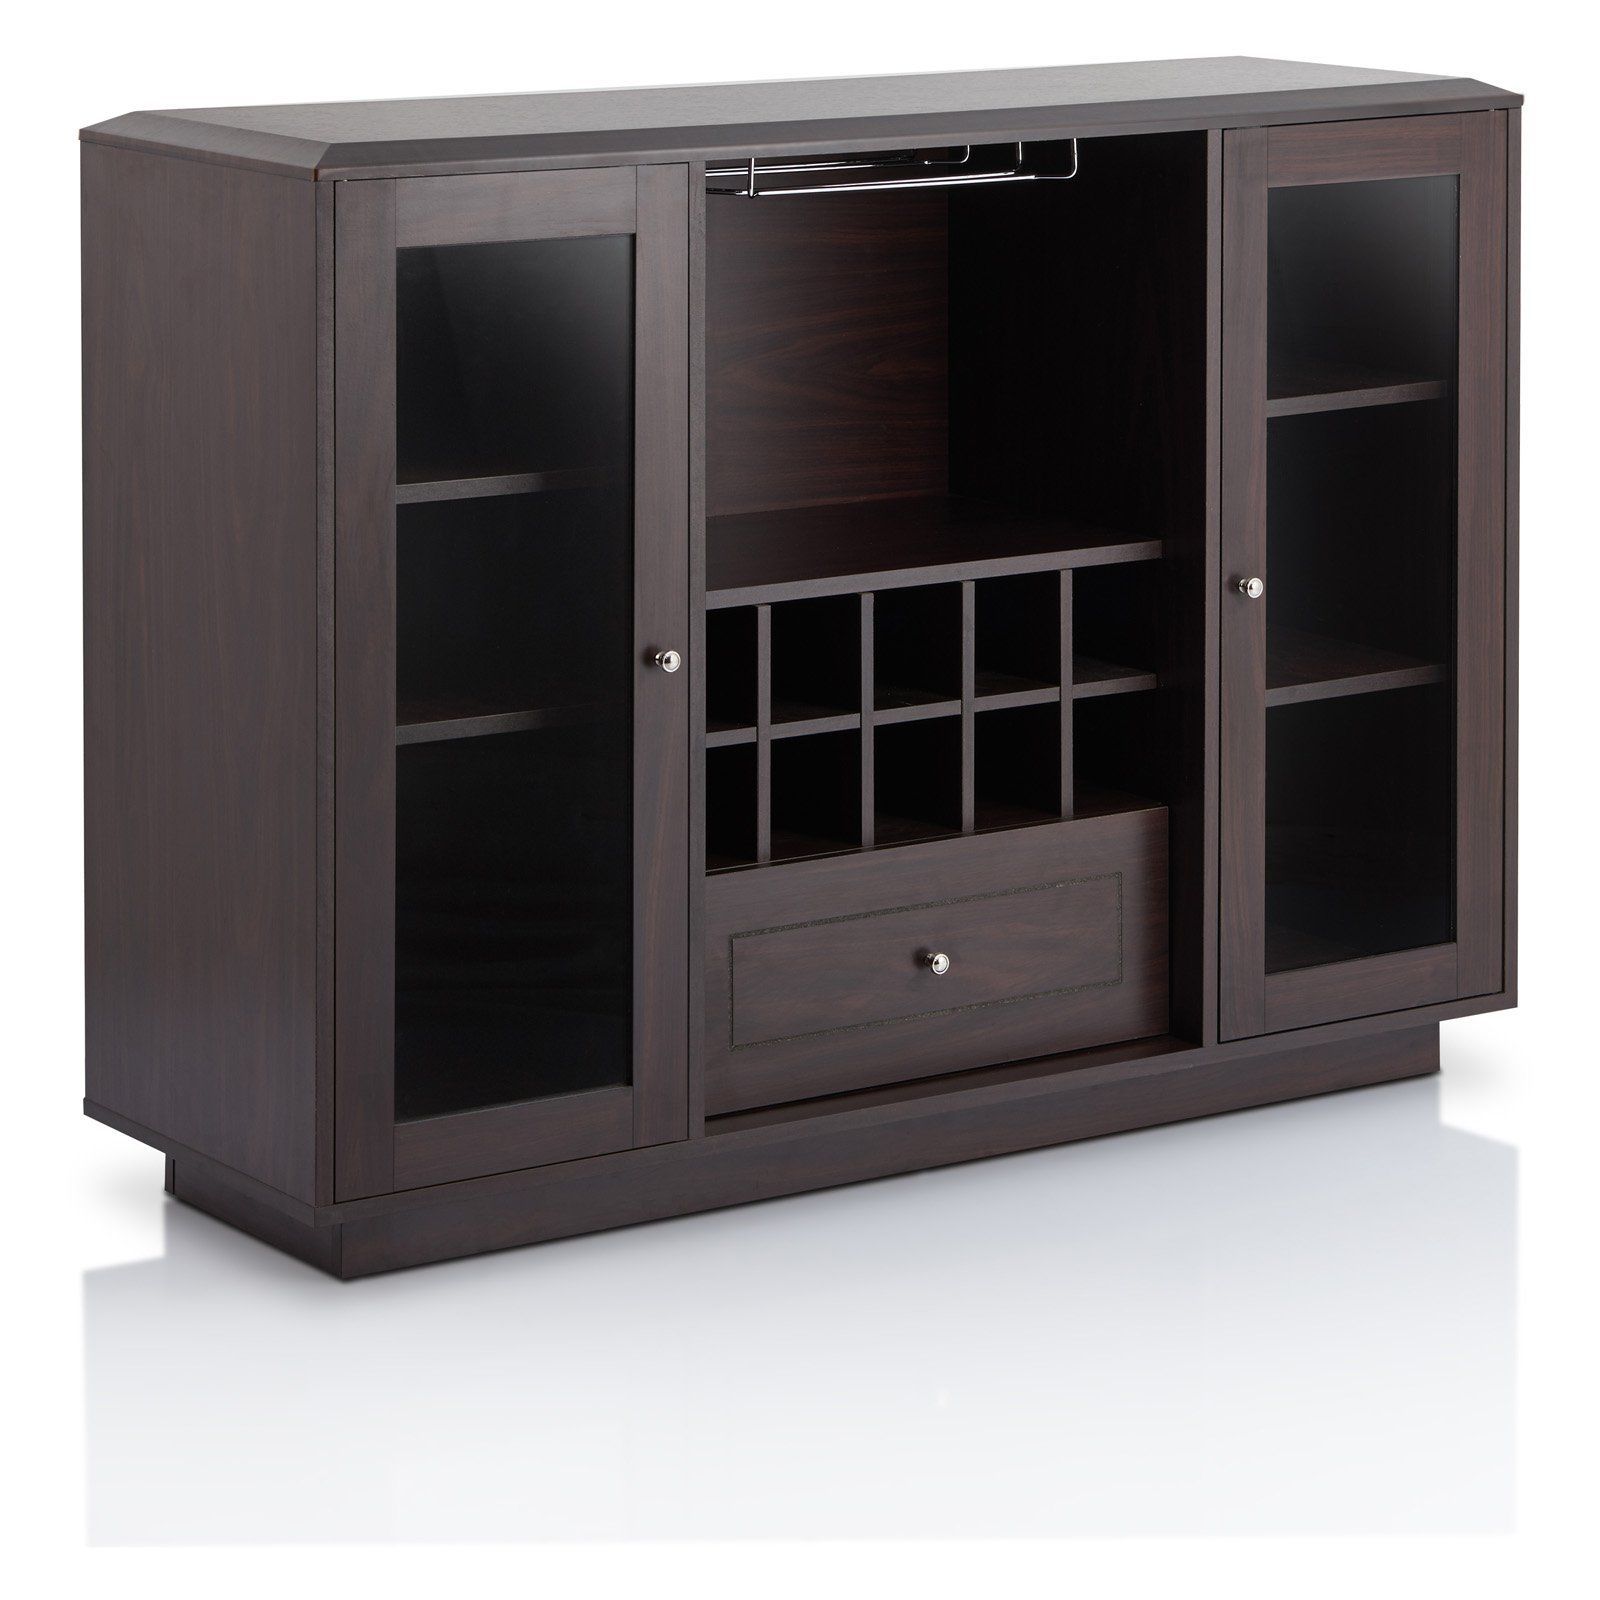 Furniture Of America Kenna Espresso Contemporary Multi Intended For Contemporary Espresso Dining Buffets (View 5 of 30)